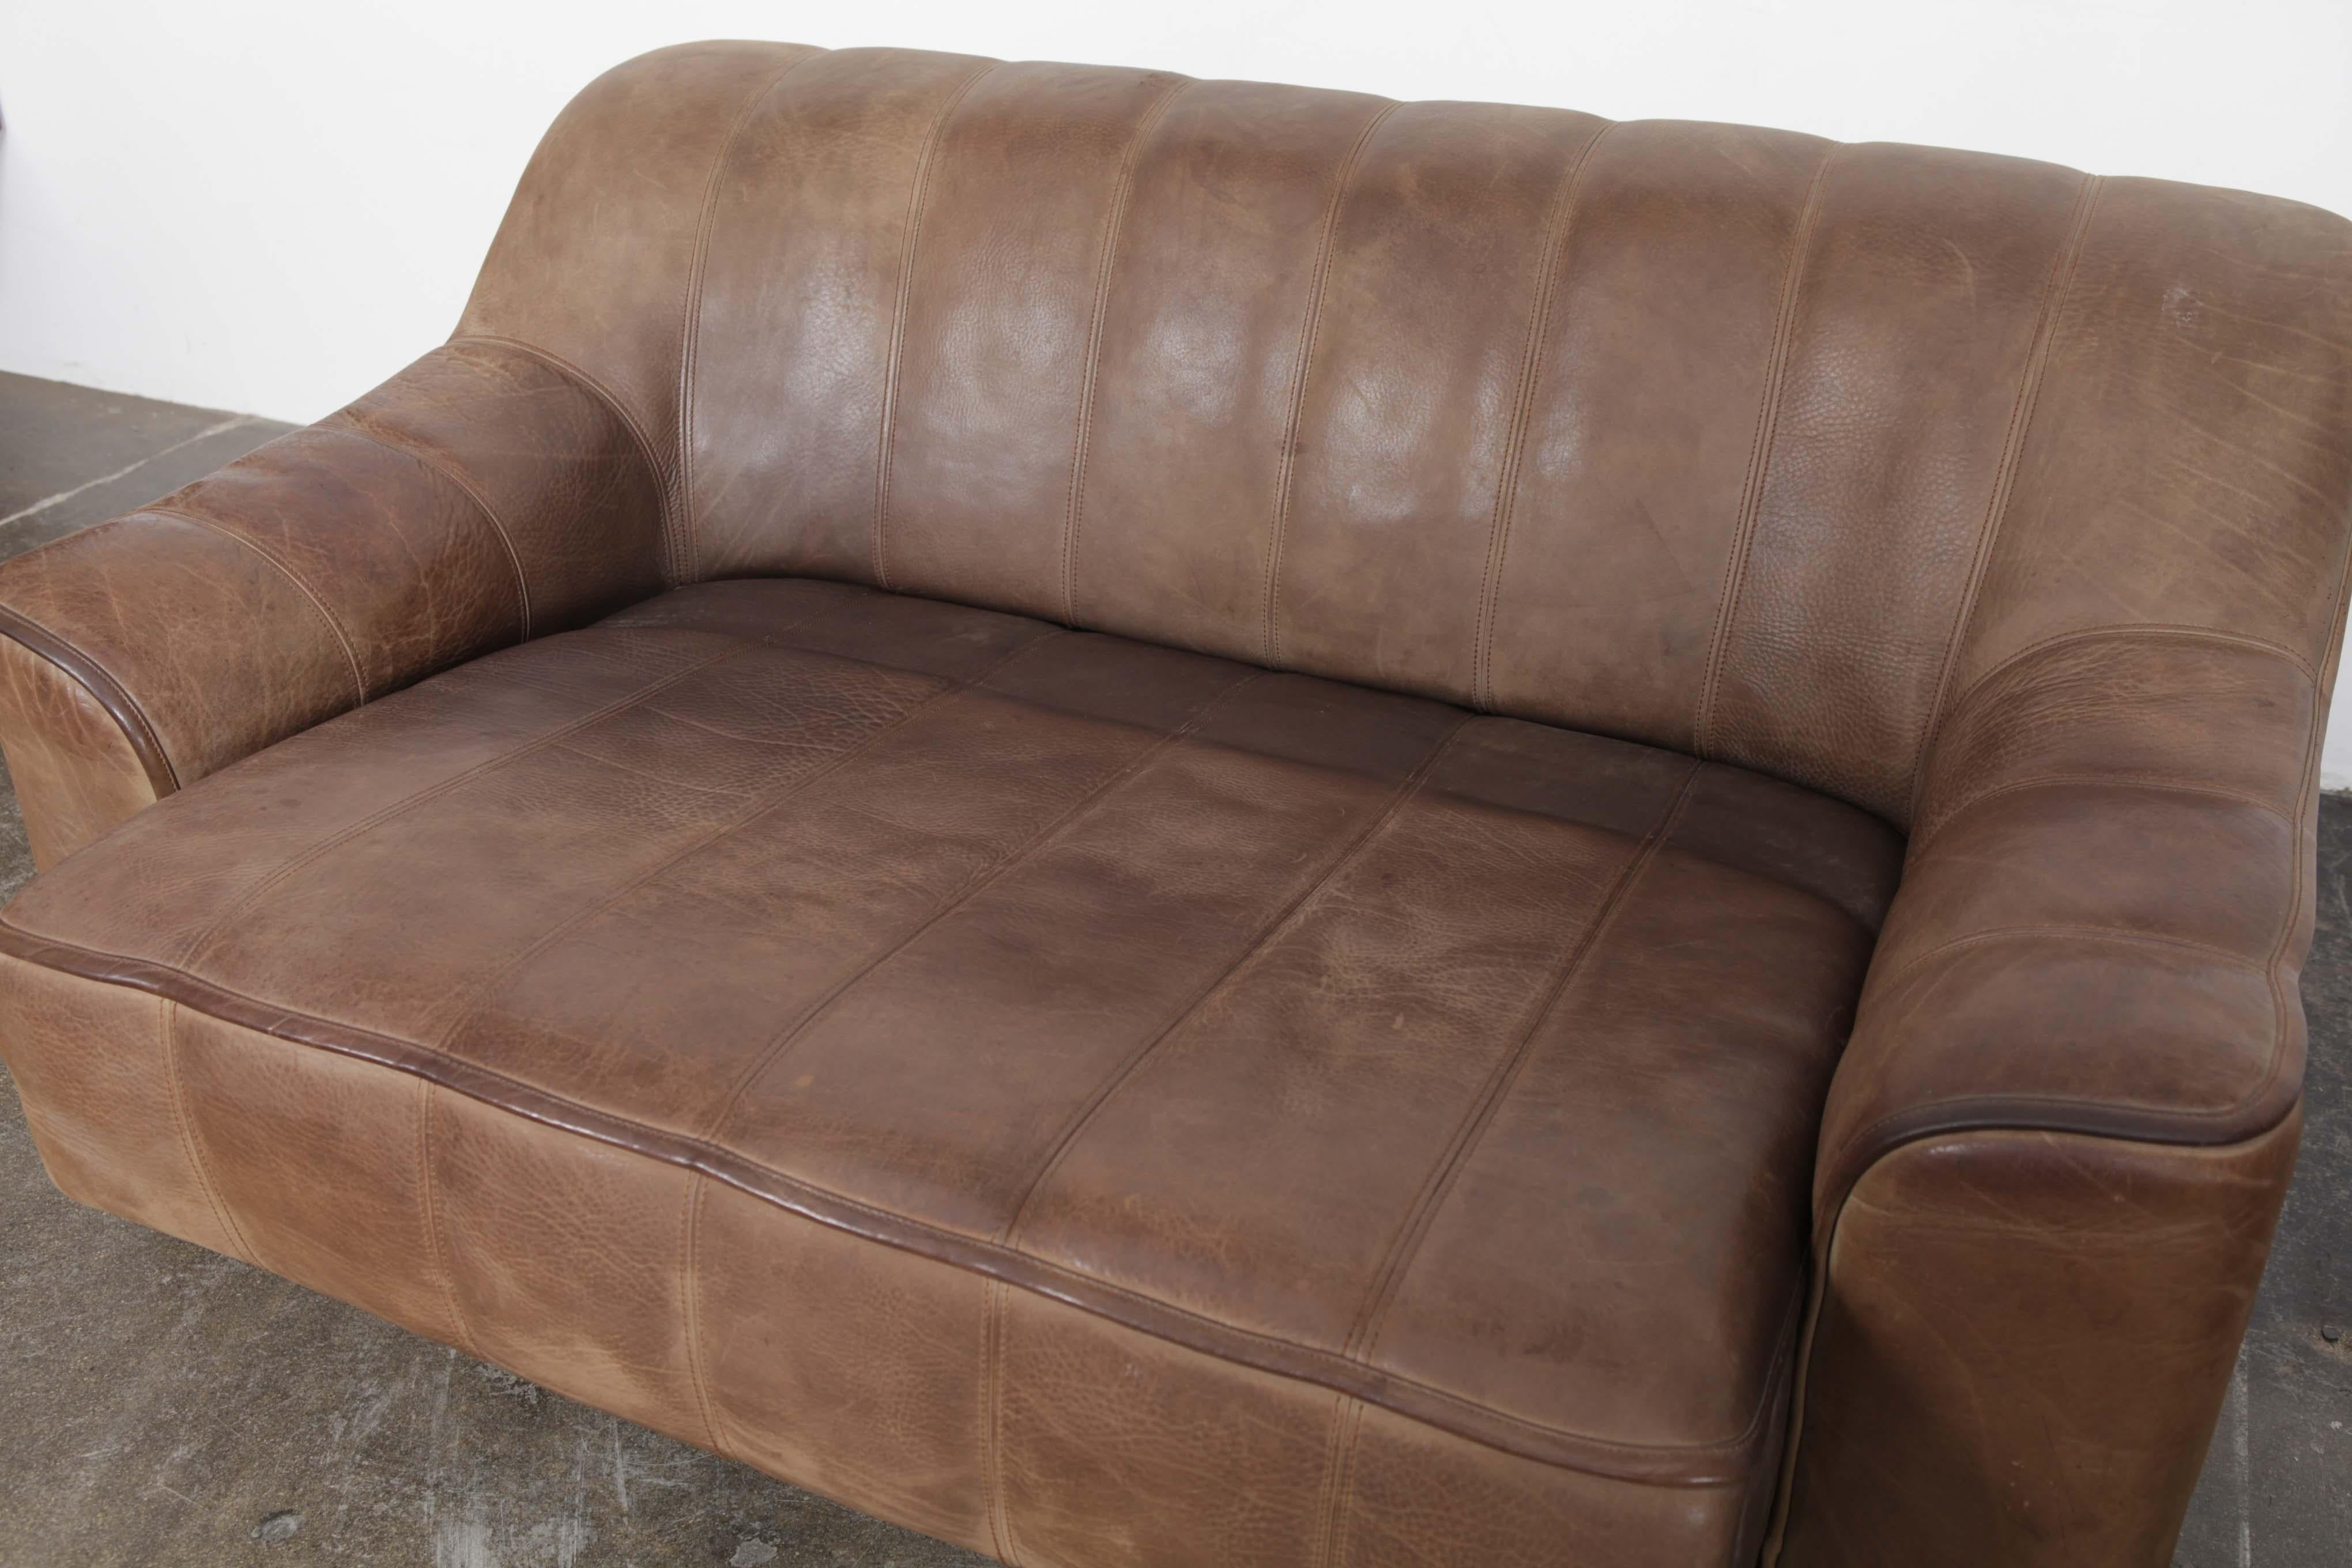 De Sede DS 44 2-Seat Sofa in Buffalo Leather, Switzerland, 1970s For Sale 3